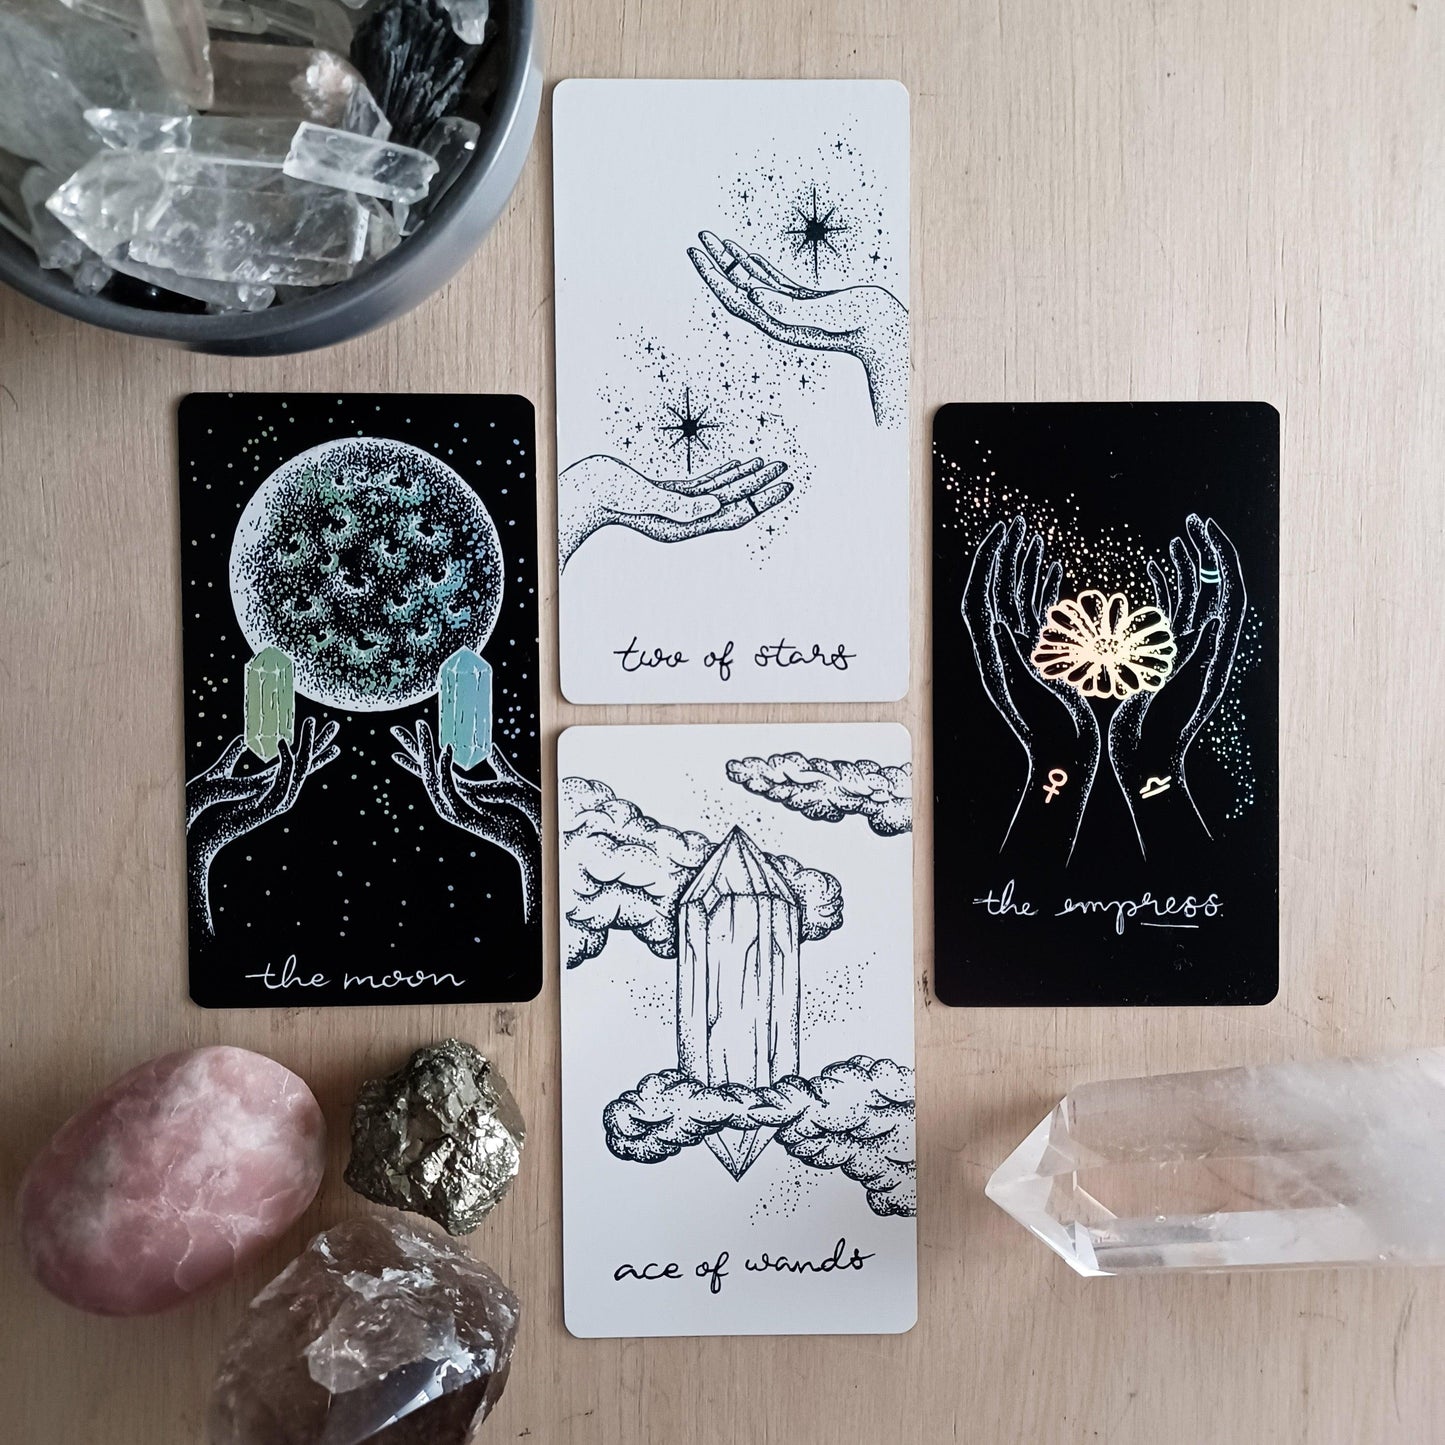 hand drawn tarot cards from Wandering Moon Tarot deck with inverted cards from special edition deck